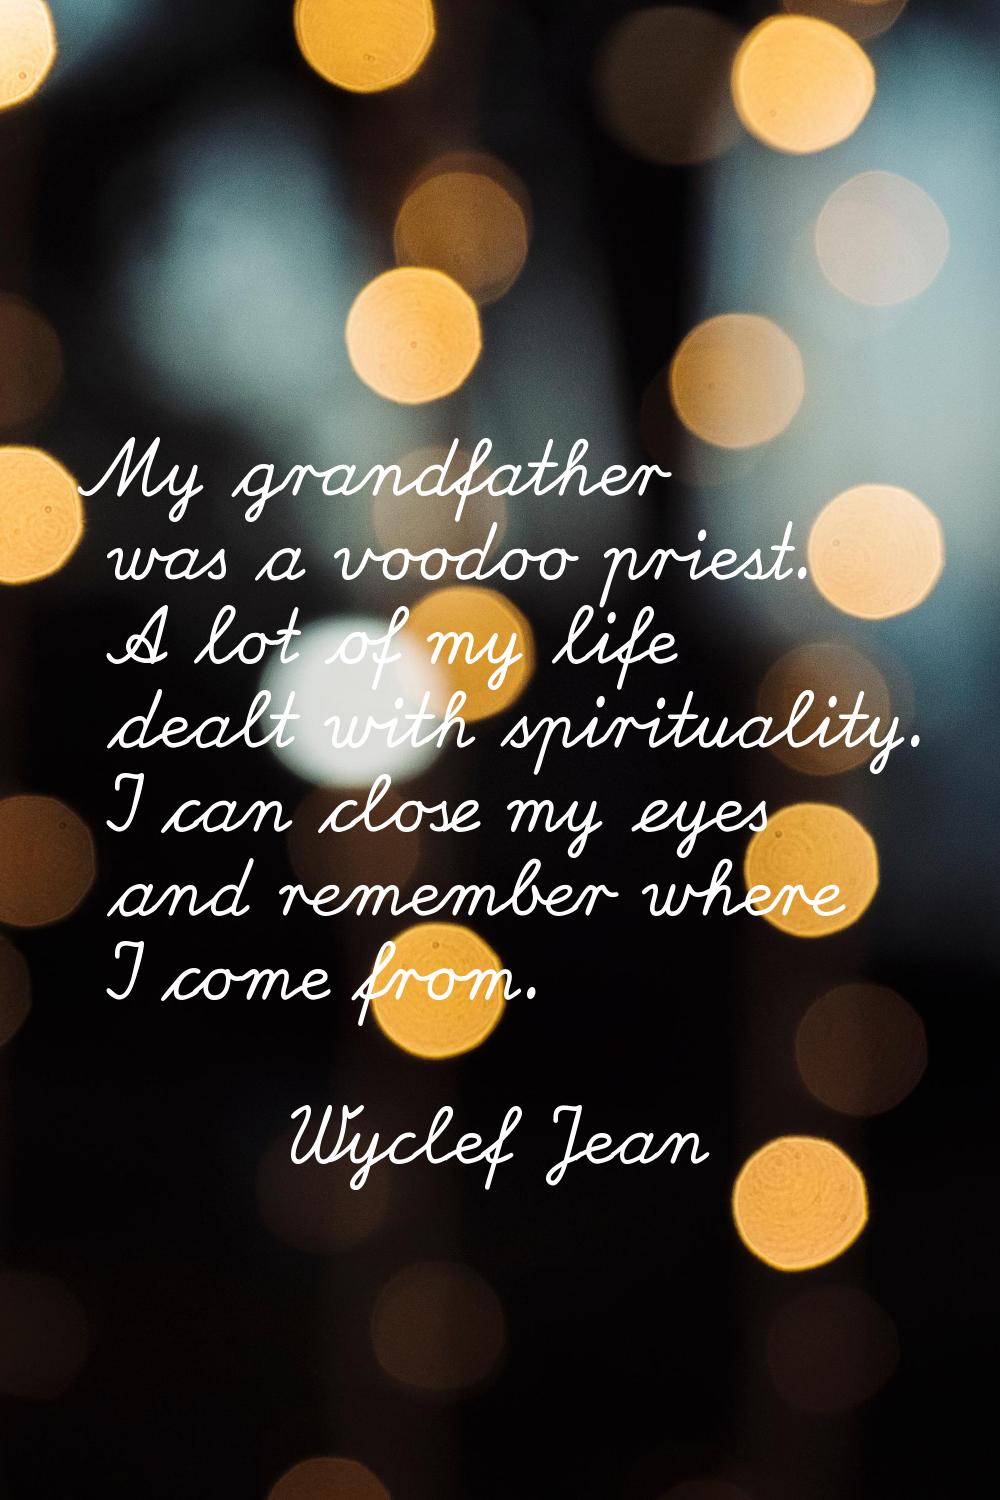 My grandfather was a voodoo priest. A lot of my life dealt with spirituality. I can close my eyes a